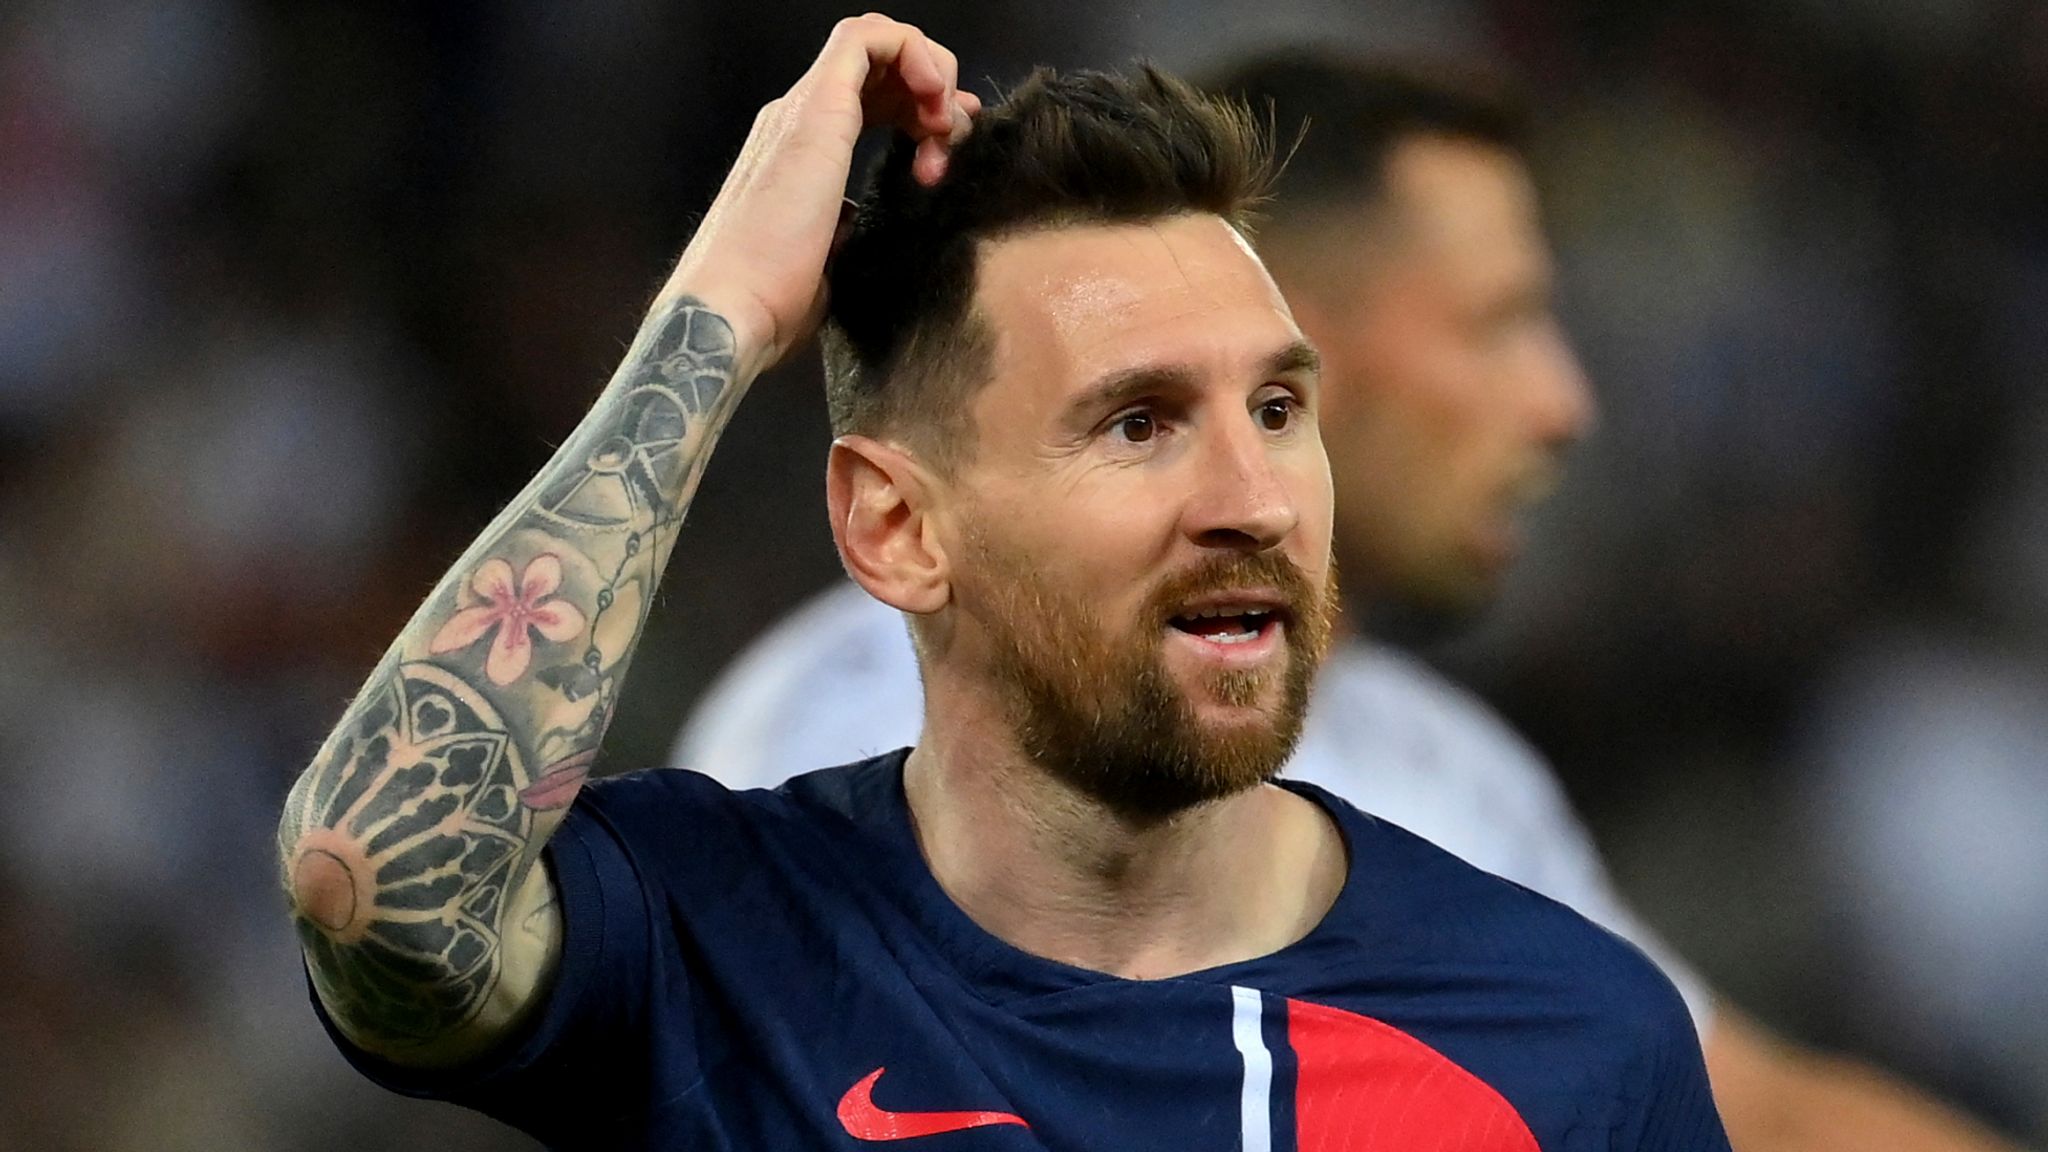 Watch: Anand Mahindra Shares Incredible Video Of Barber Portraying Messi's  Face In Haircut